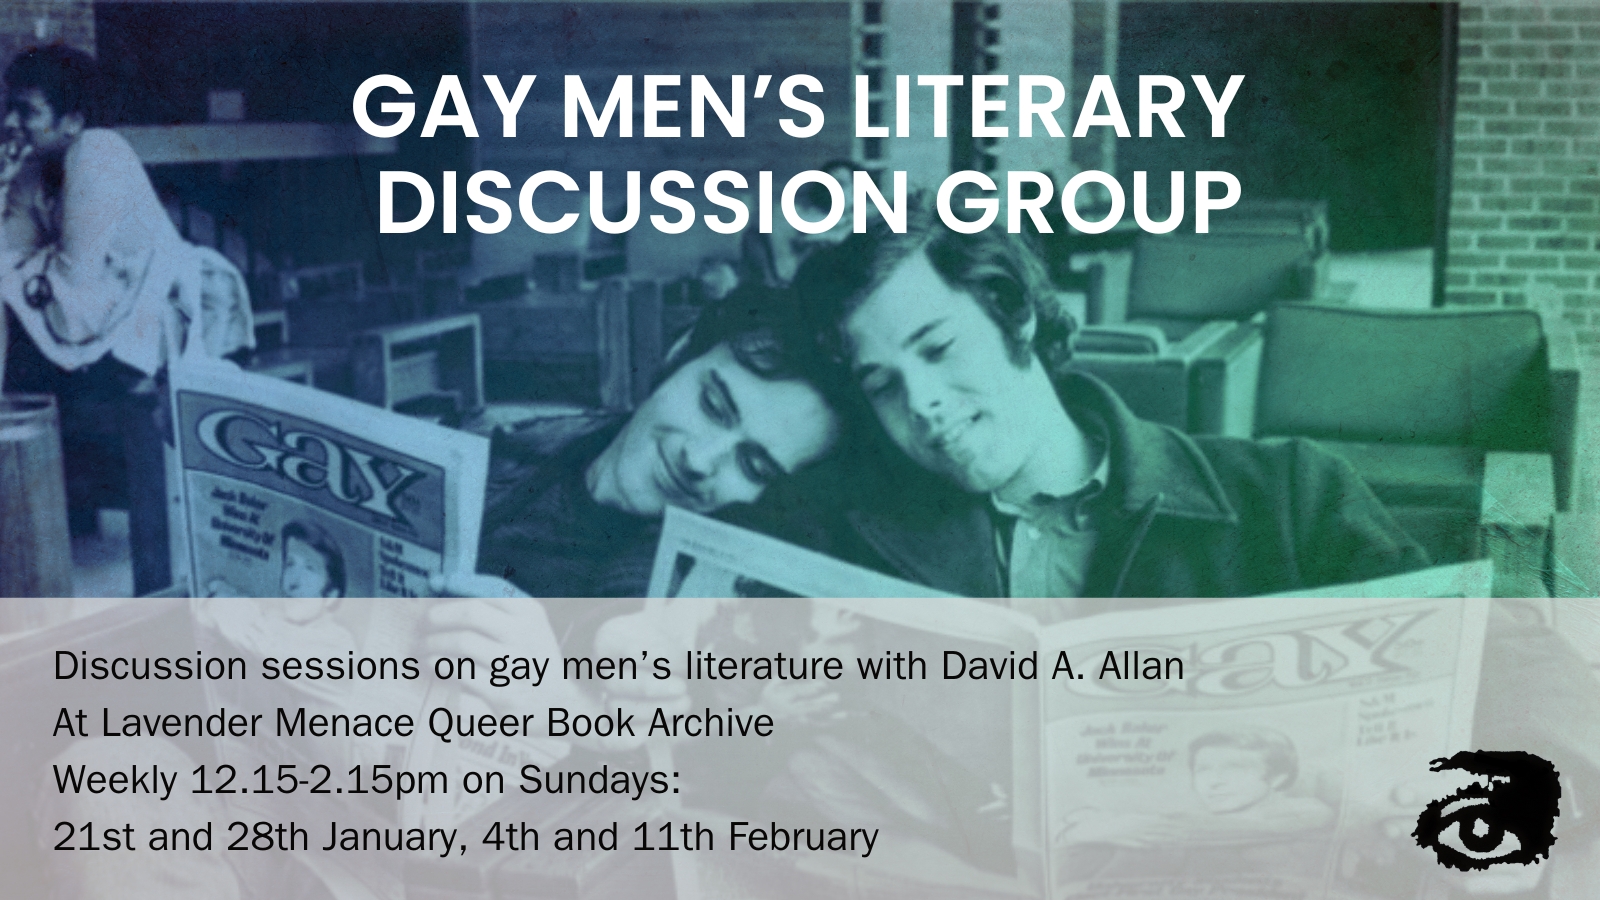 Decorative image - two men reading. Text: Gay Men's Literary Discussion Group